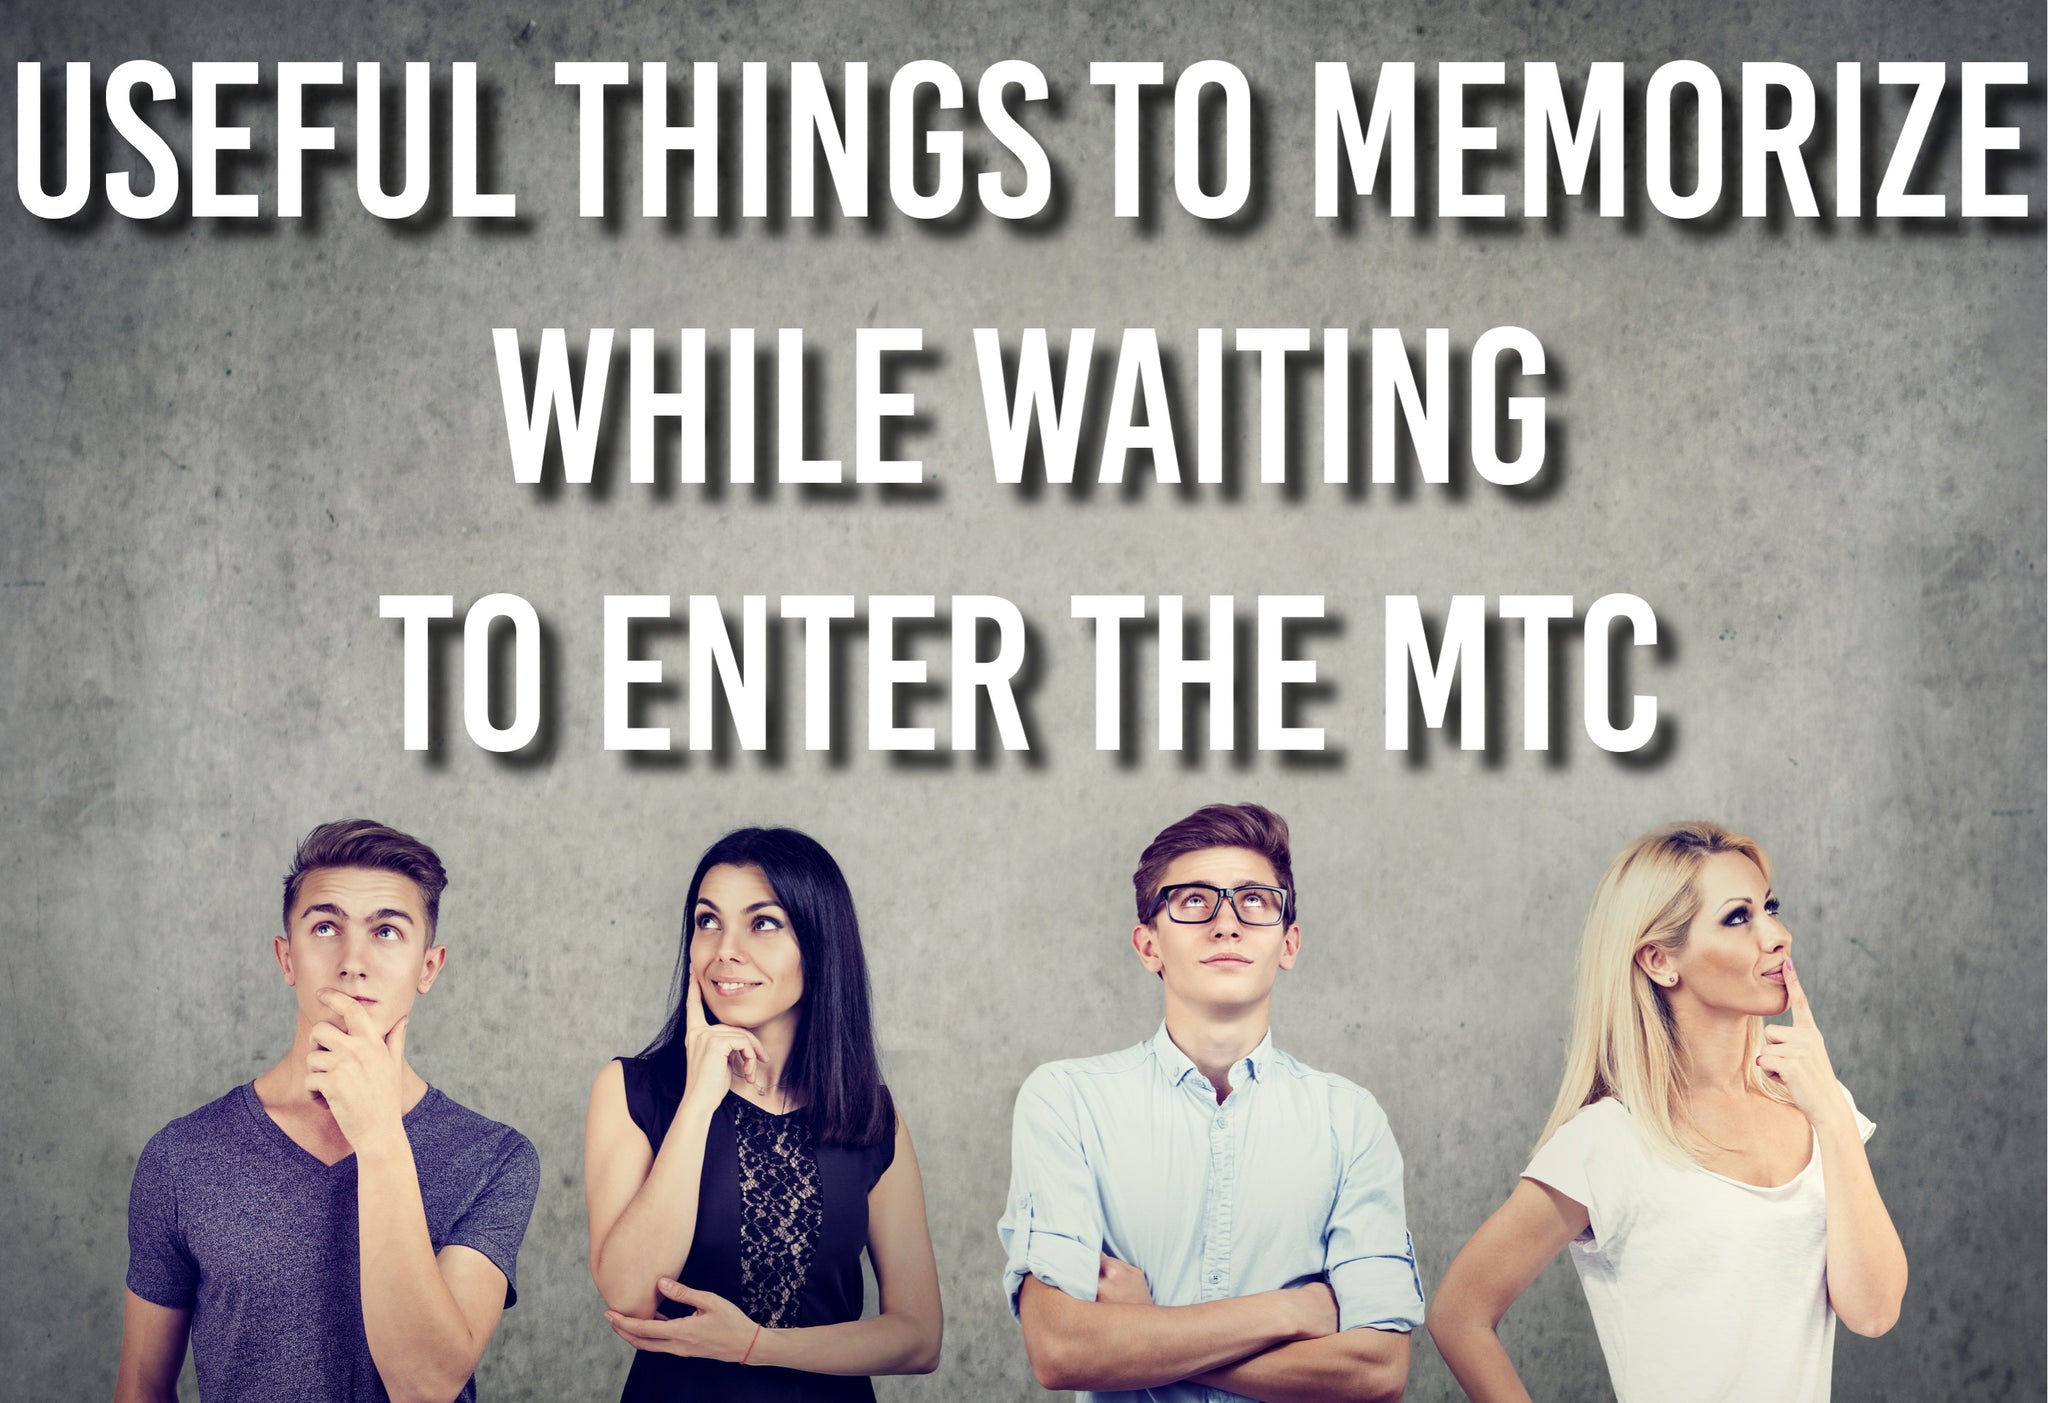 Useful Things to Memorize While Waiting to Enter the MTC